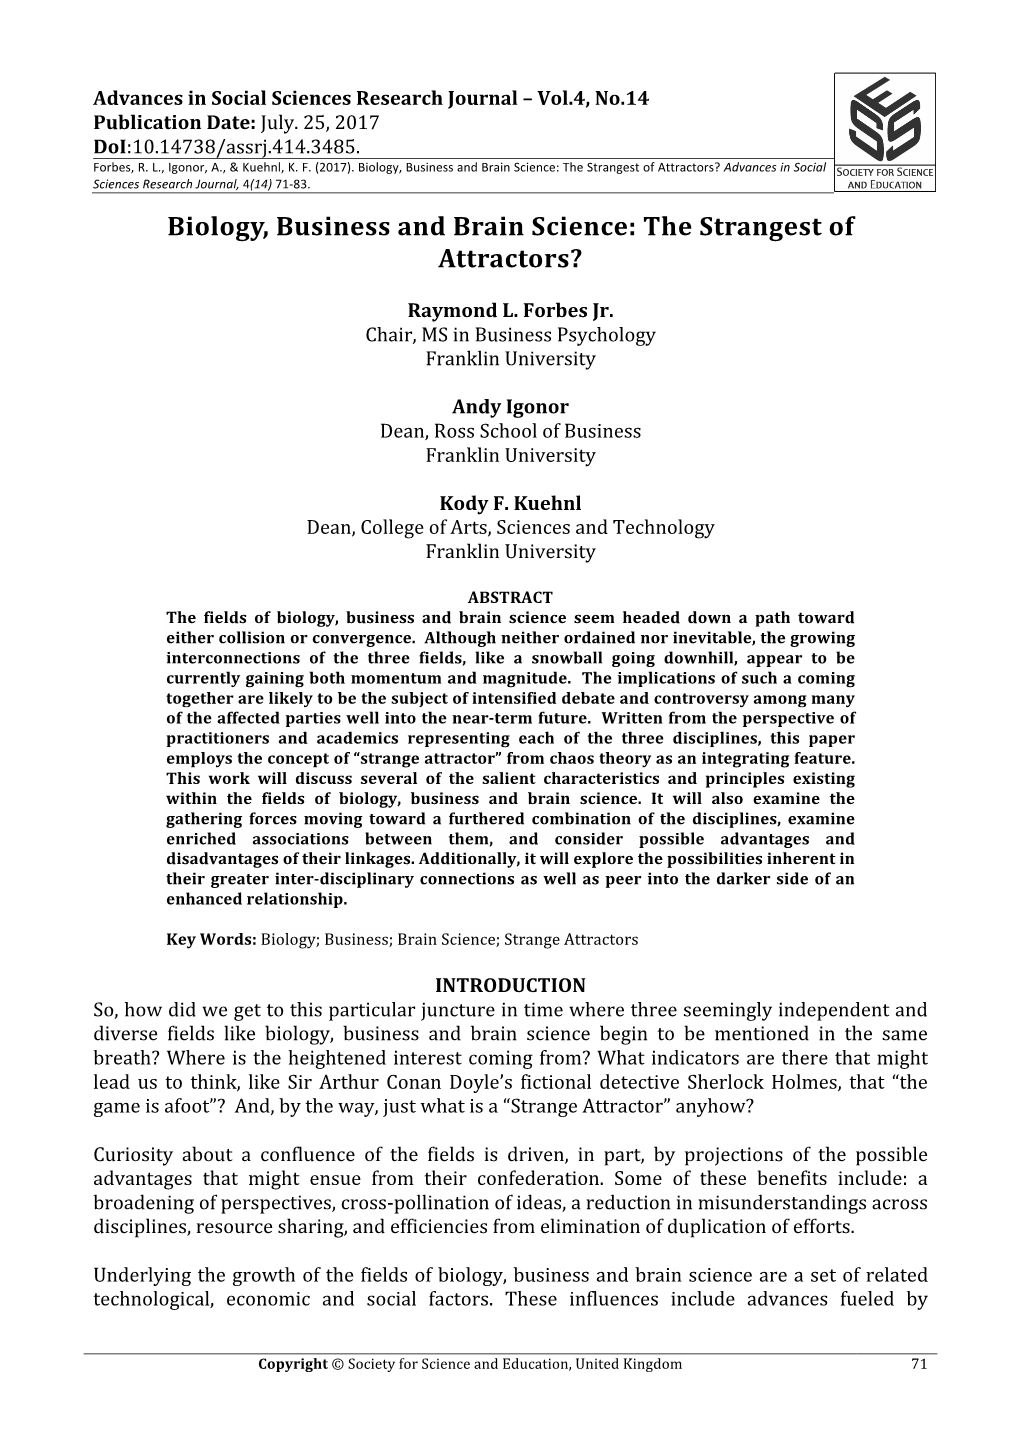 Biology, Business and Brain Science: the Strangest of Attractors? Advances in Social Sciences Research Journal, 4(14) 71-83